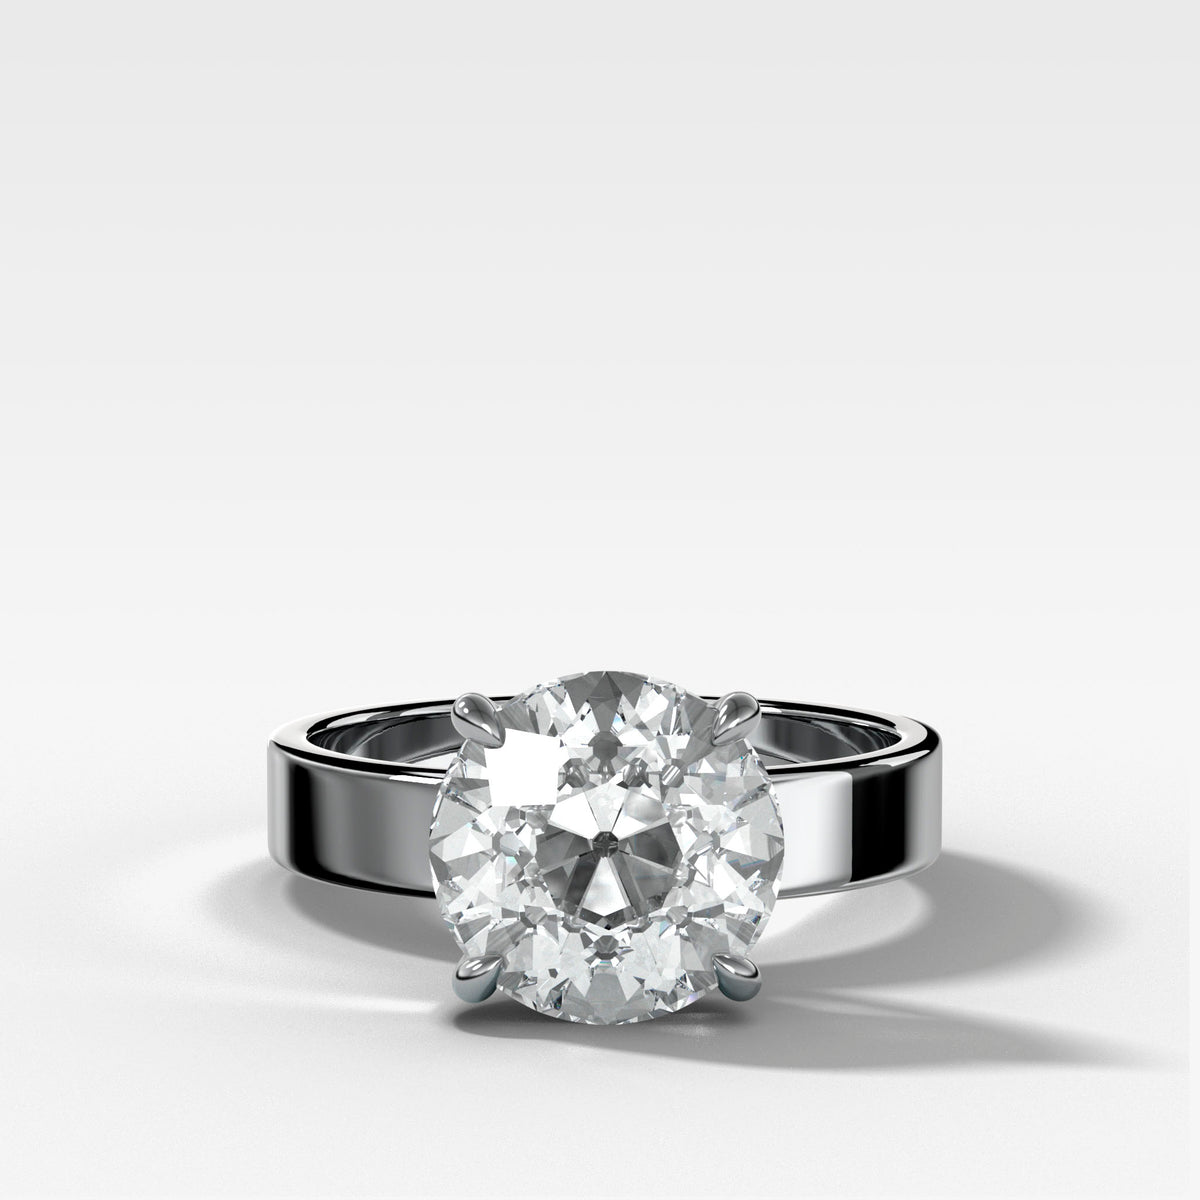 Finest Solitaire Engagement Ring With Old Euro Cut Diamond